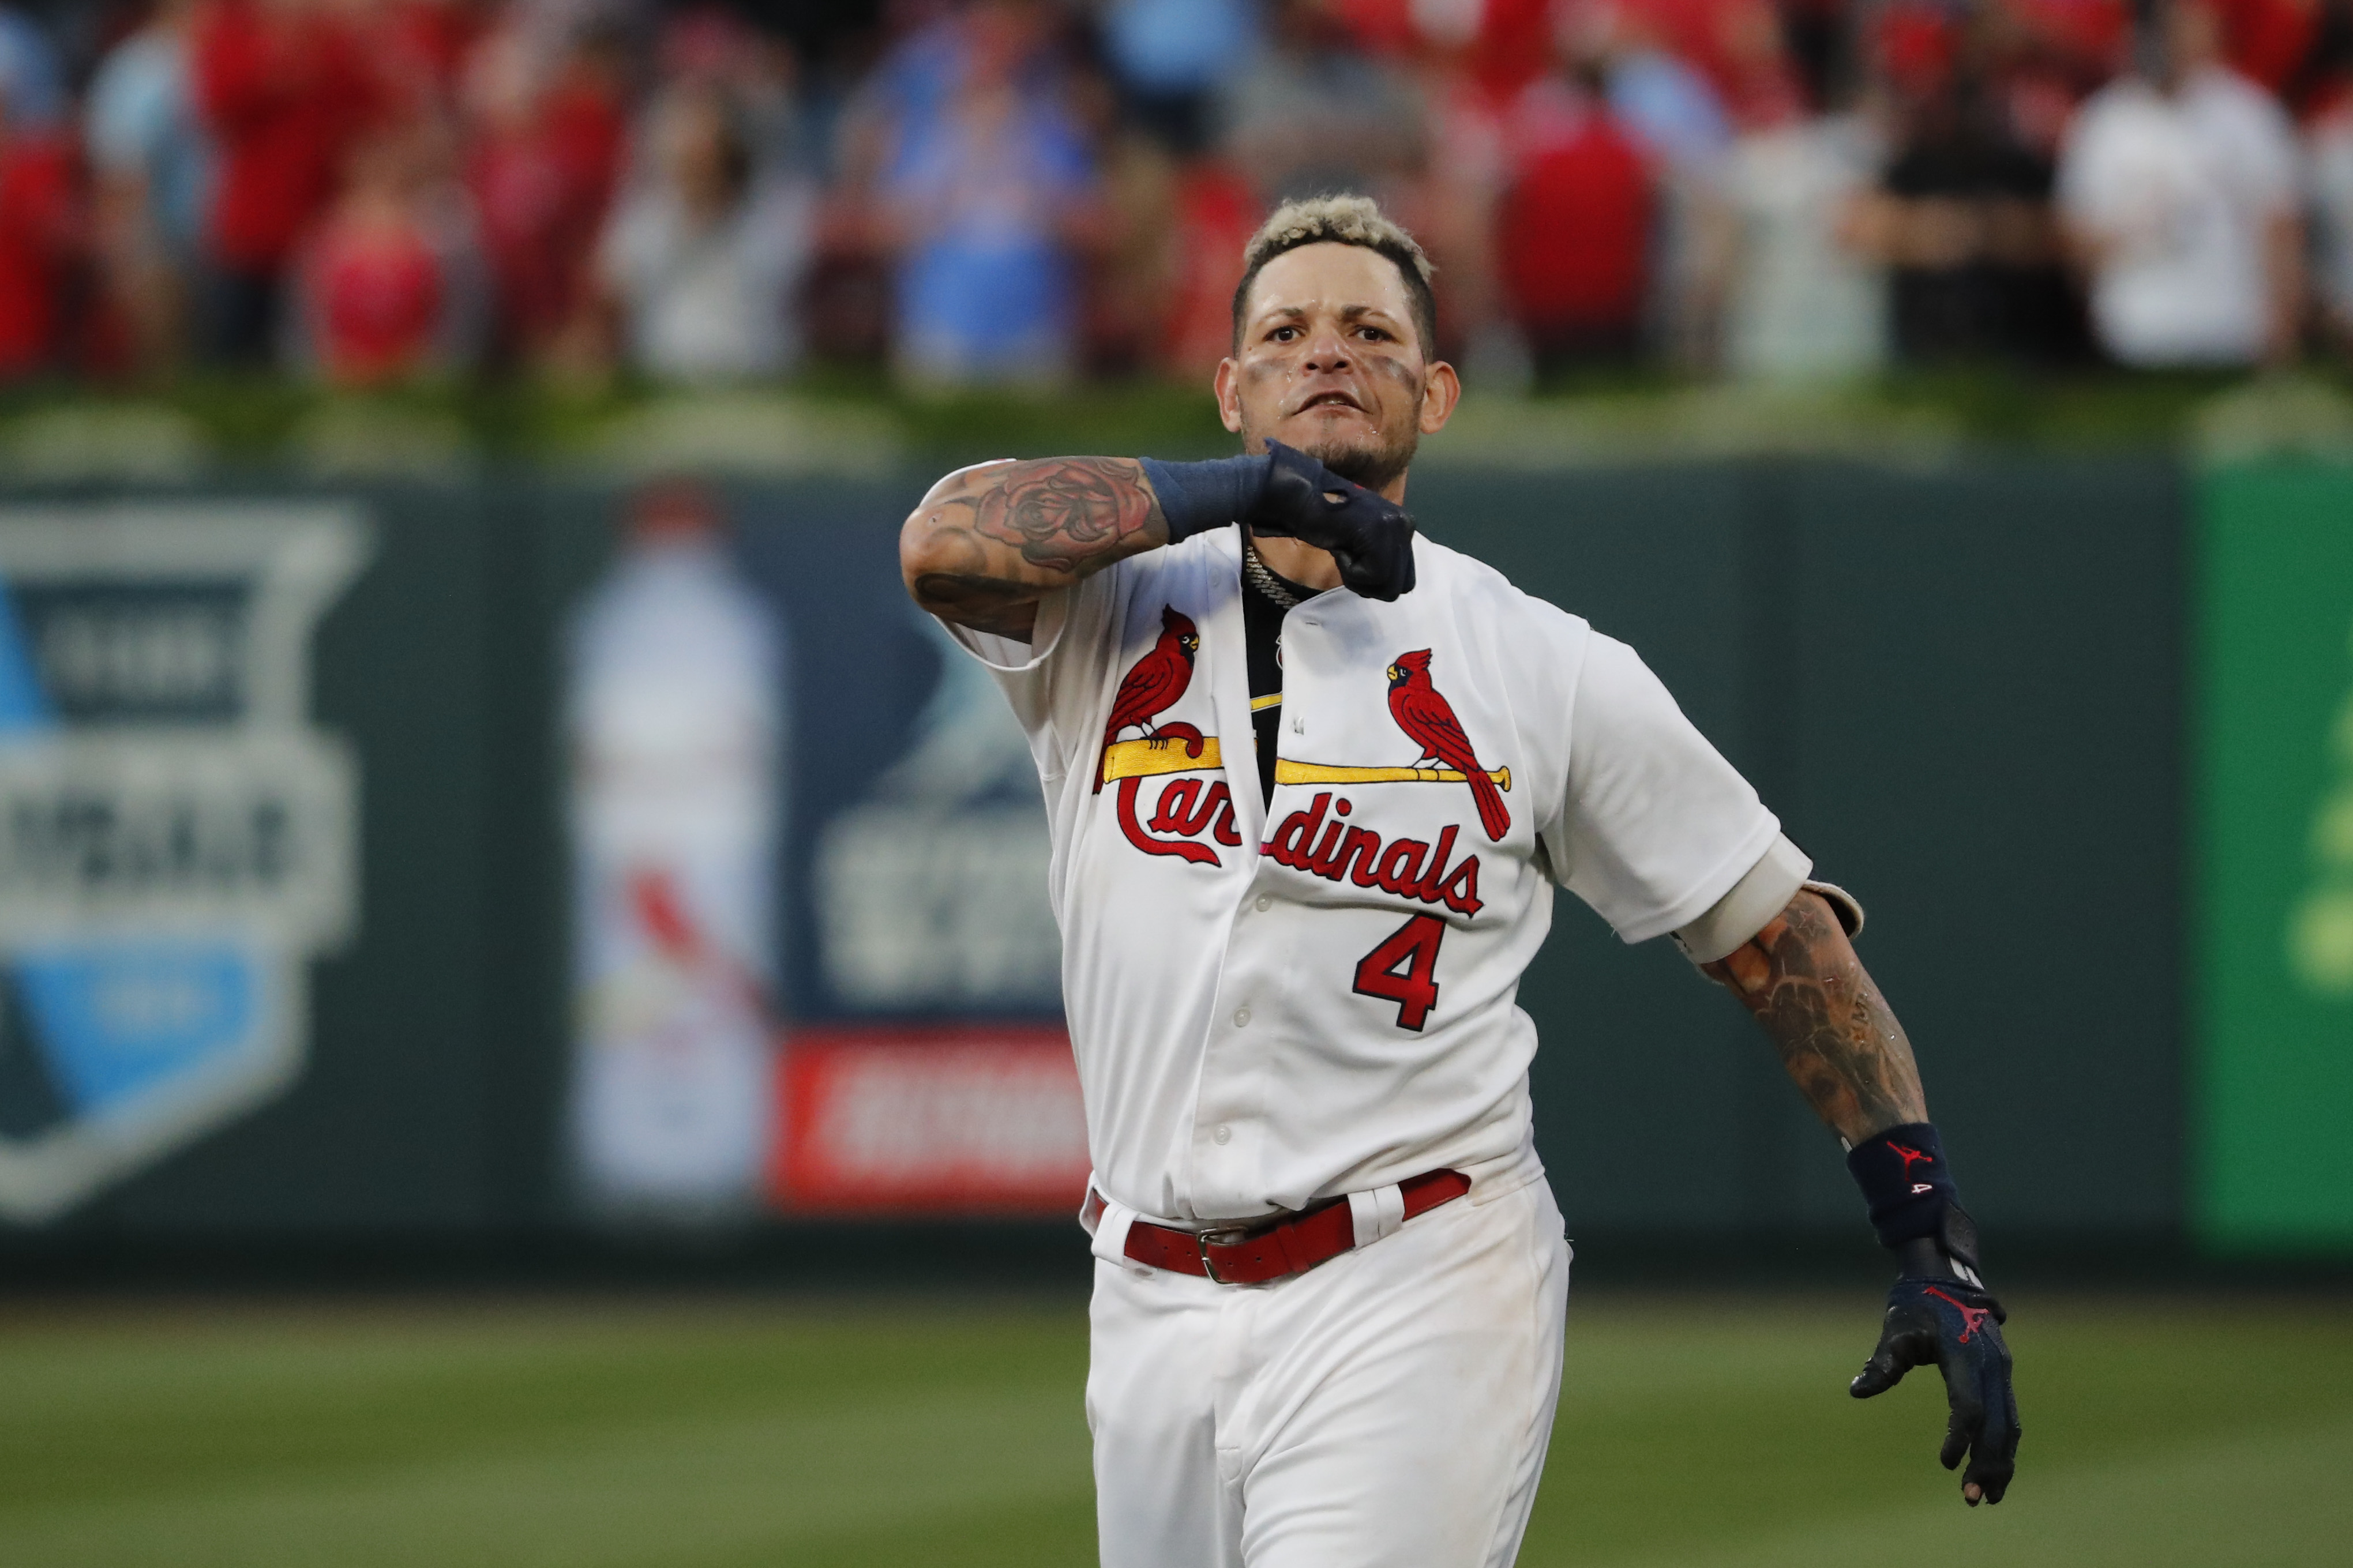 Molina's walk-off RBI in 10th inning of Game 4: CARDS WIN